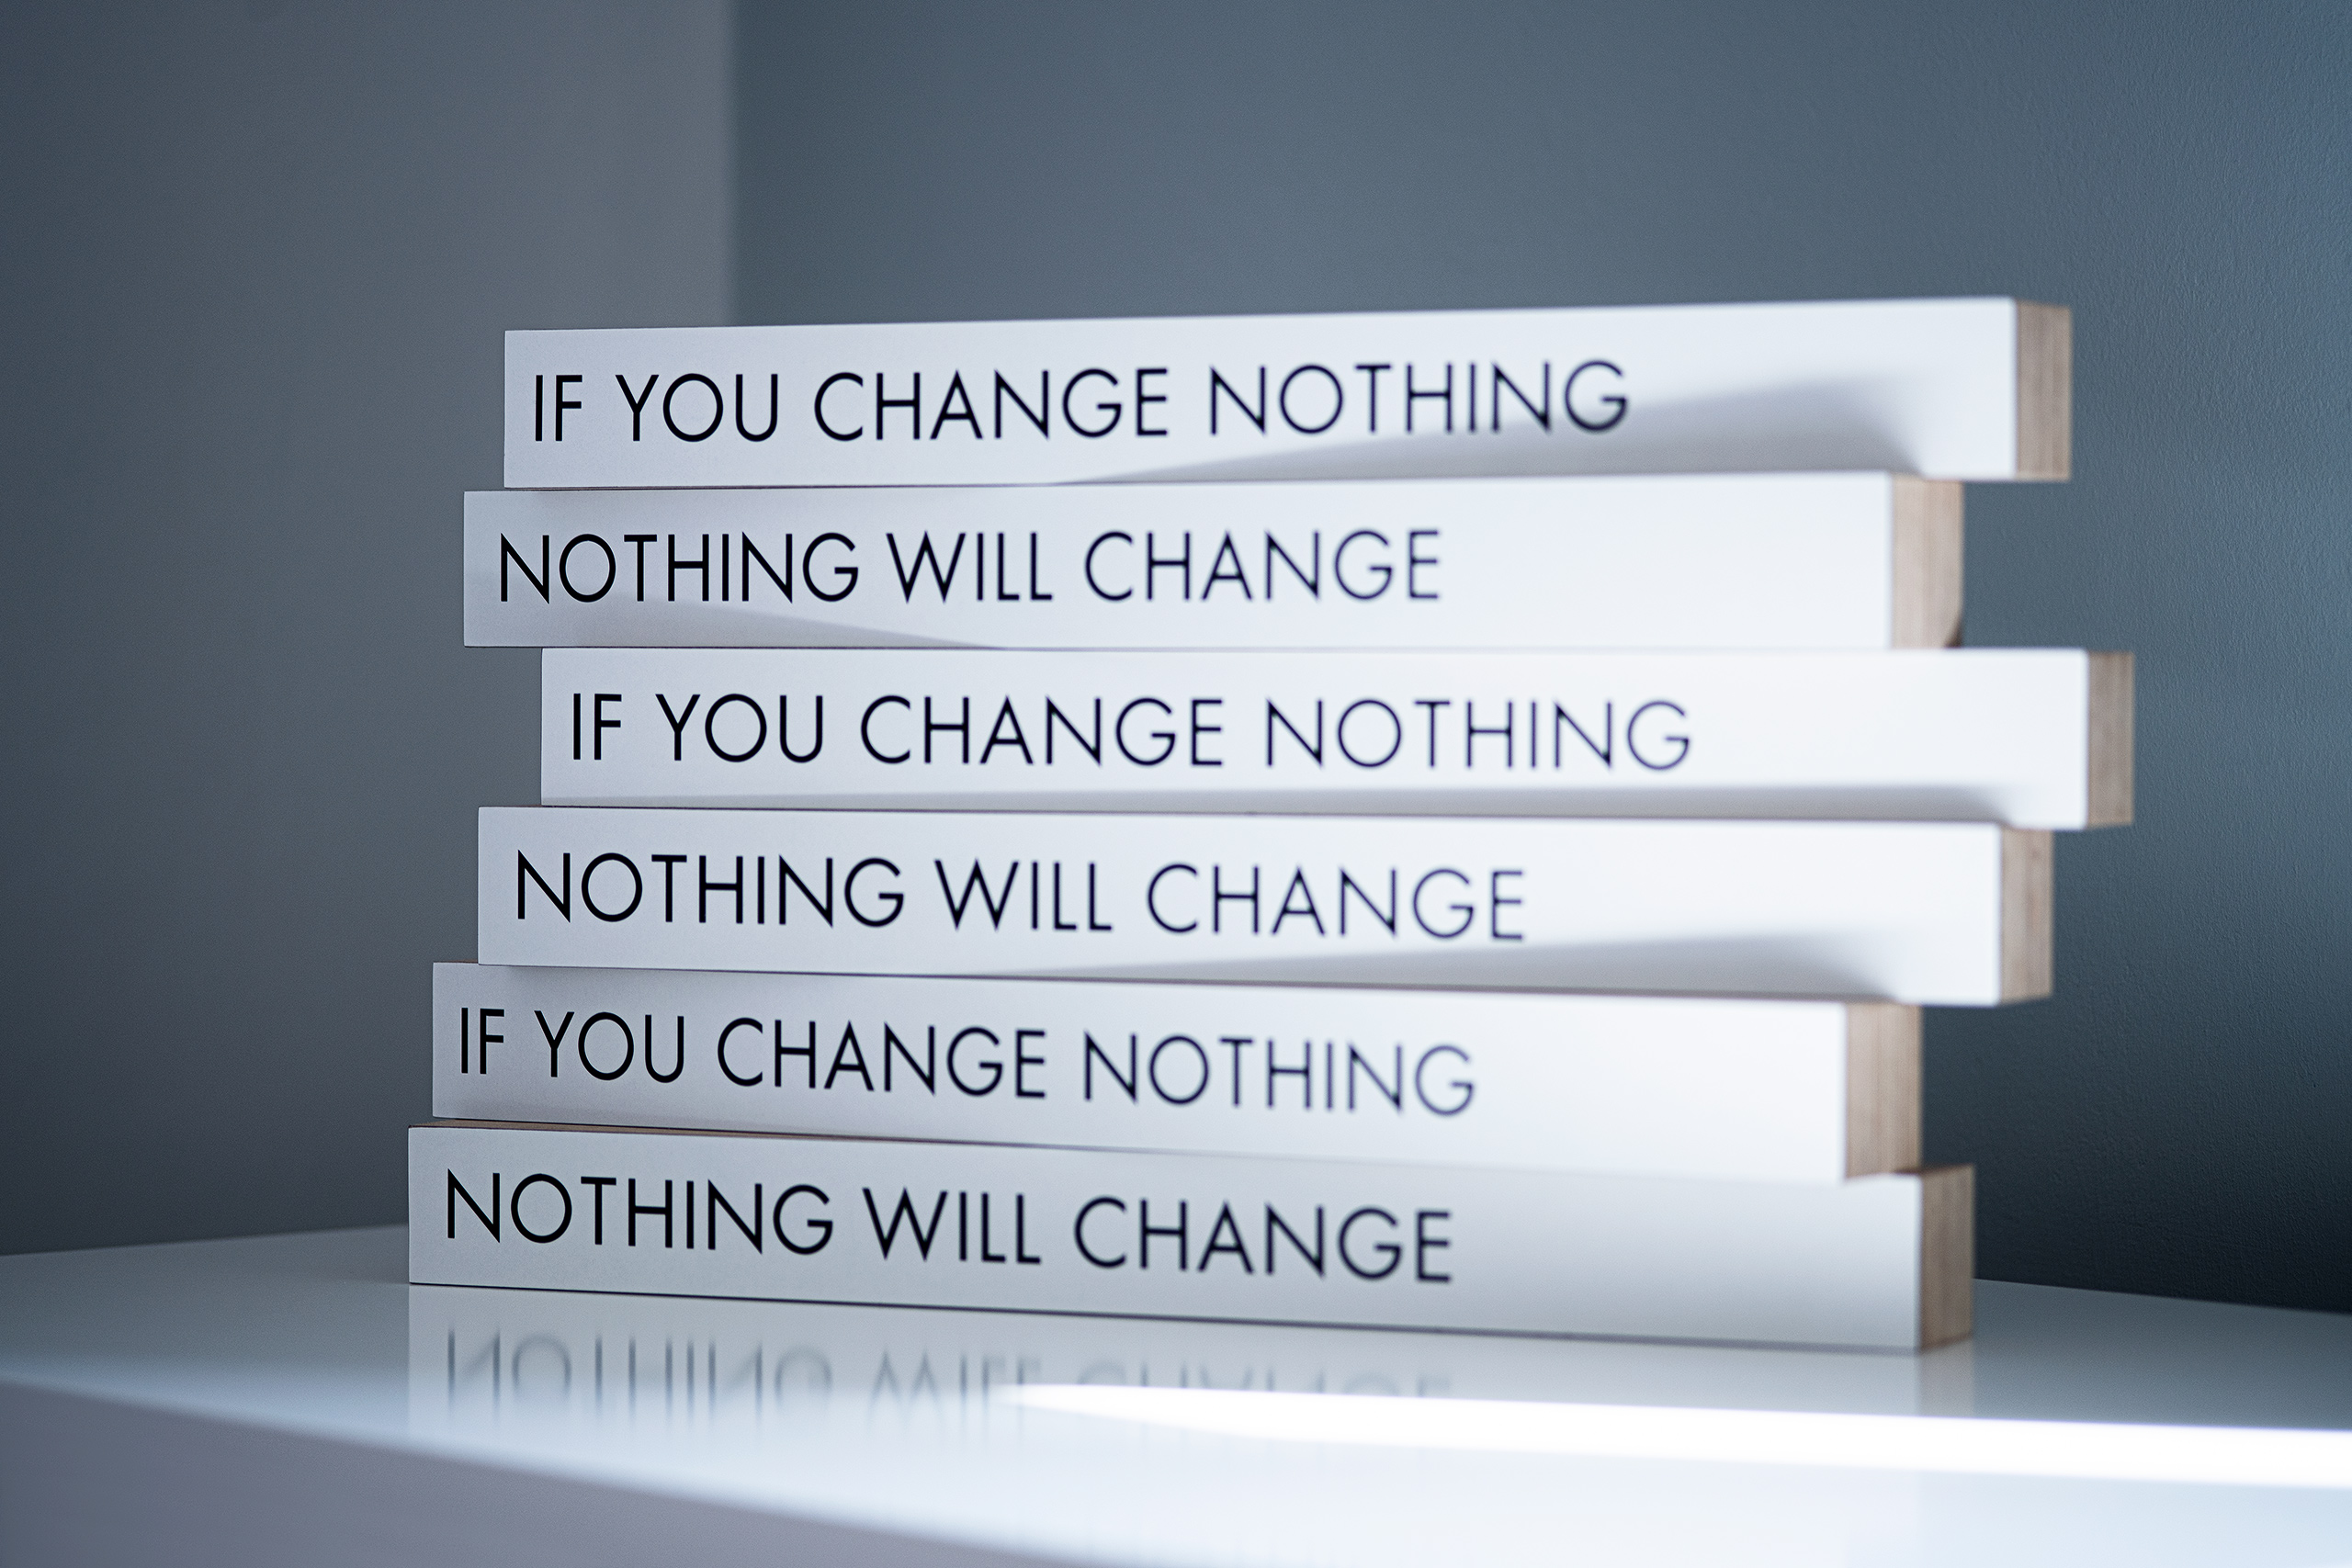 If you change nothing...